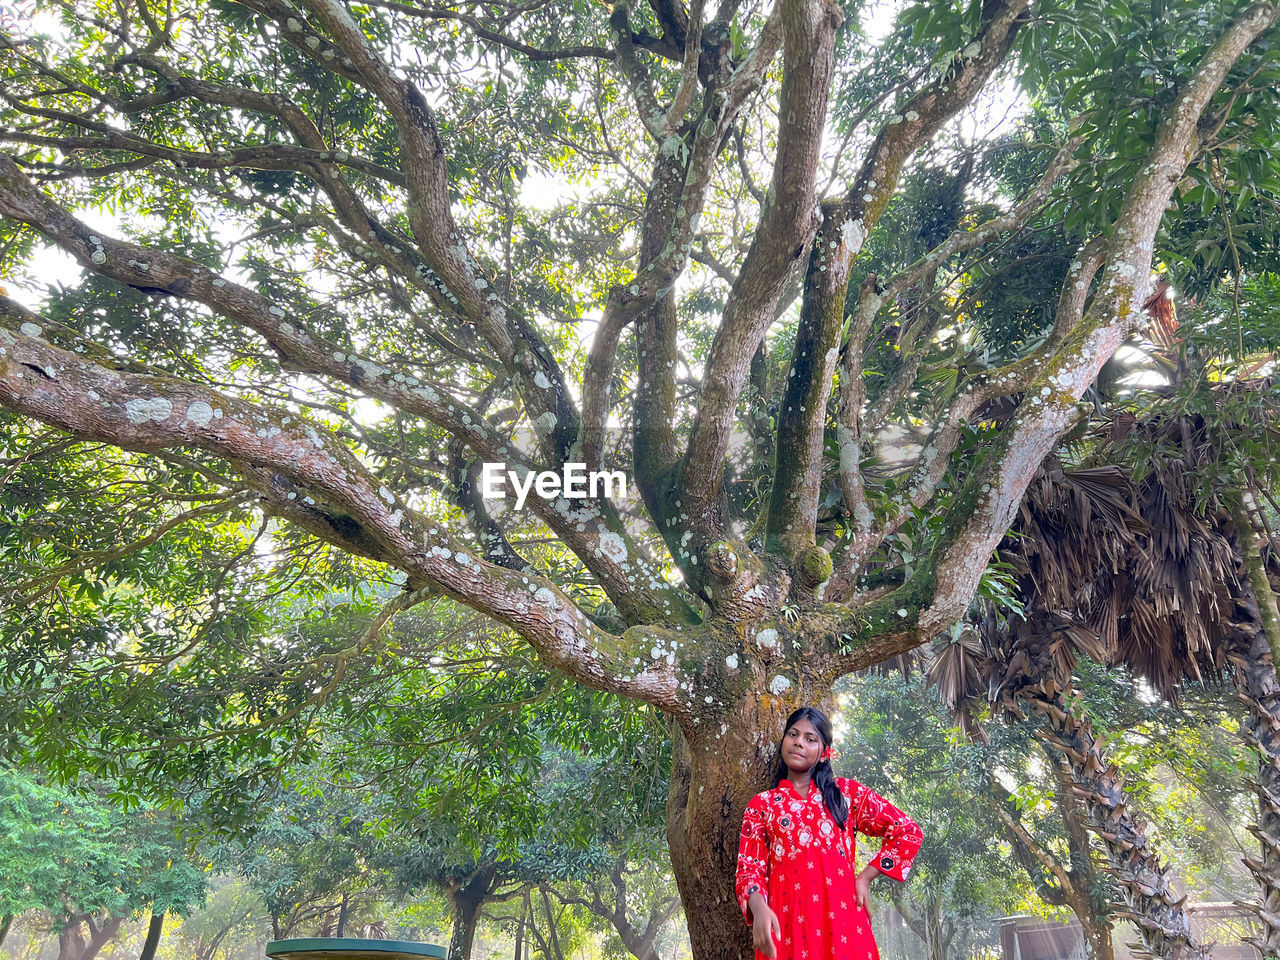 tree, plant, flower, one person, nature, women, growth, leisure activity, day, adult, lifestyles, standing, branch, outdoors, beauty in nature, green, young adult, front view, clothing, casual clothing, land, three quarter length, red, tree trunk, trunk, forest, female